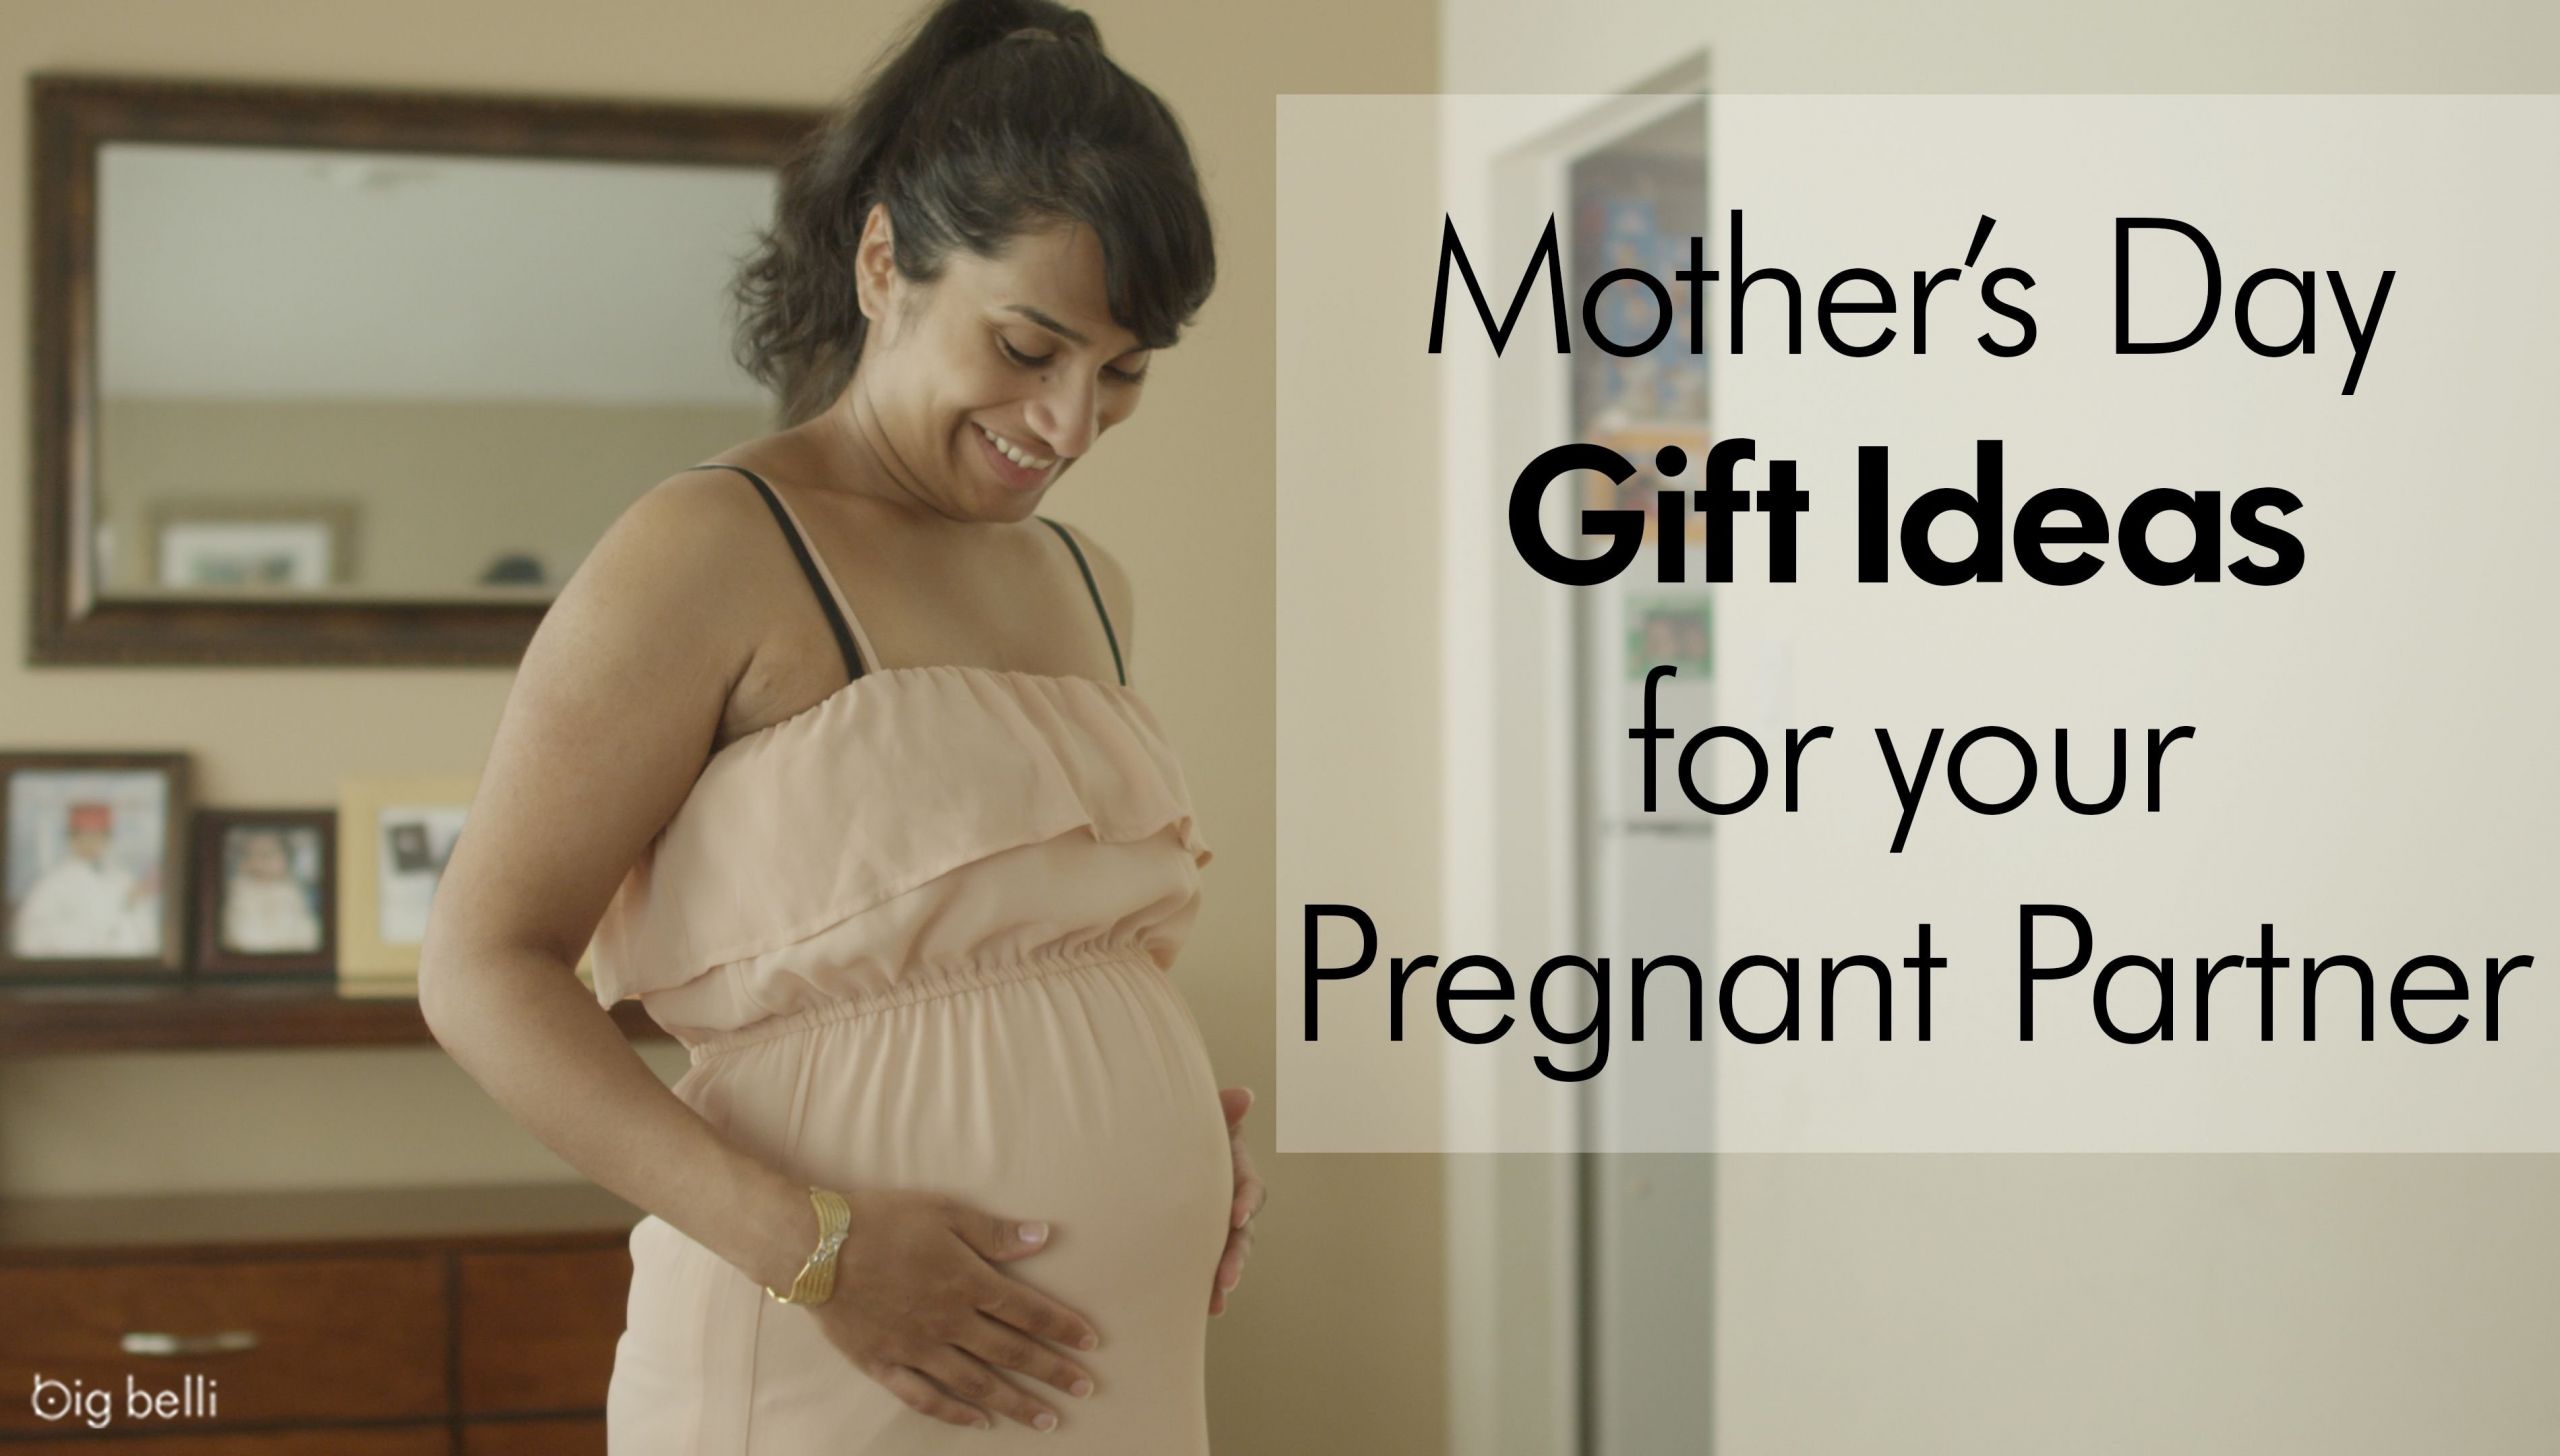 Valentines Gift Ideas For Pregnant Wife
 10 Wonderful Gift Ideas For Pregnant Wife 2020